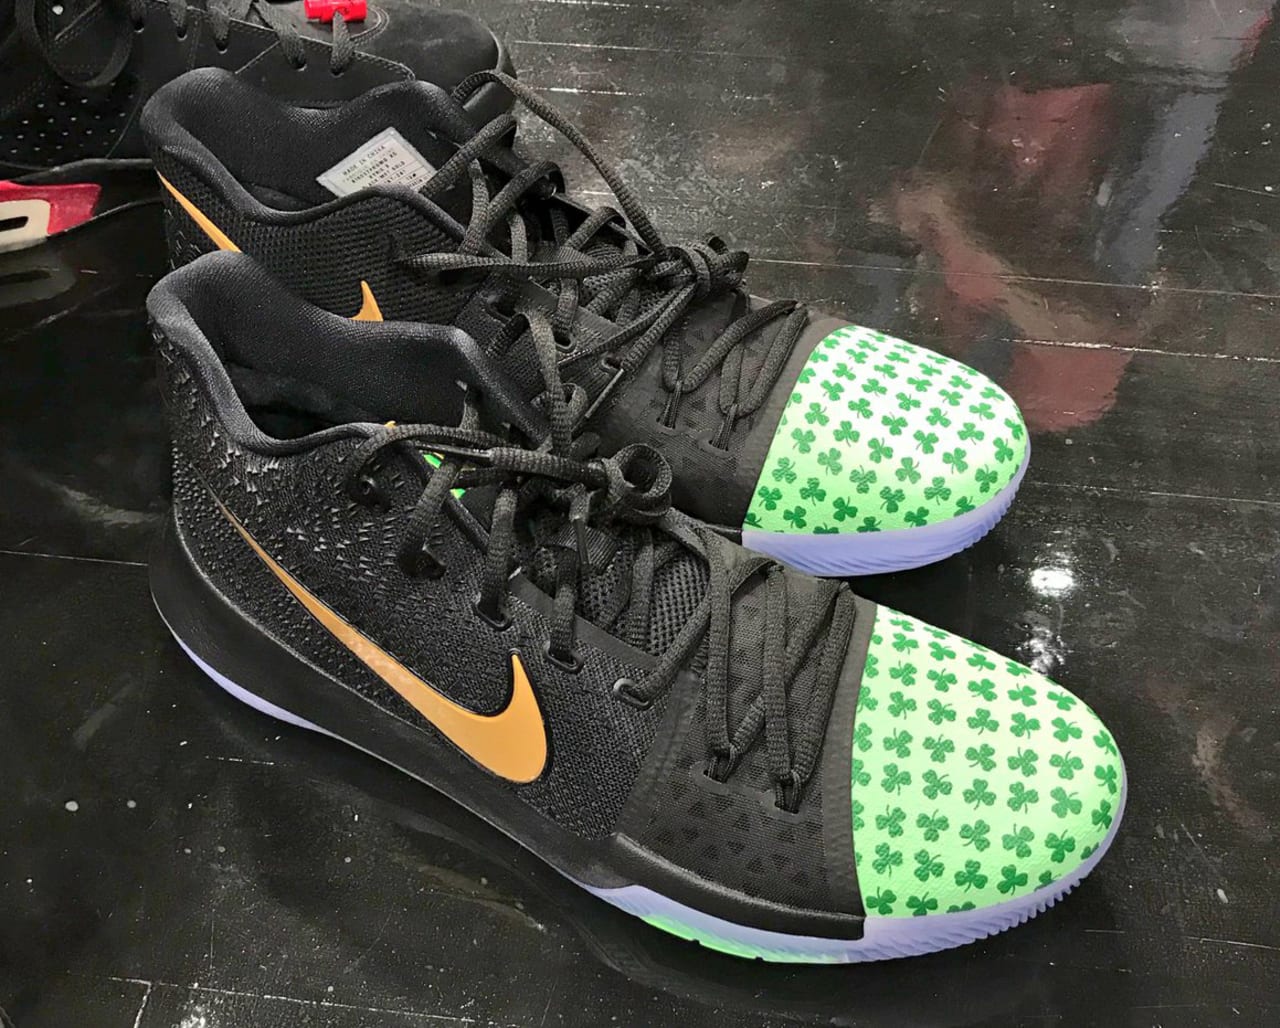 kyrie irving shoes 2018 boston